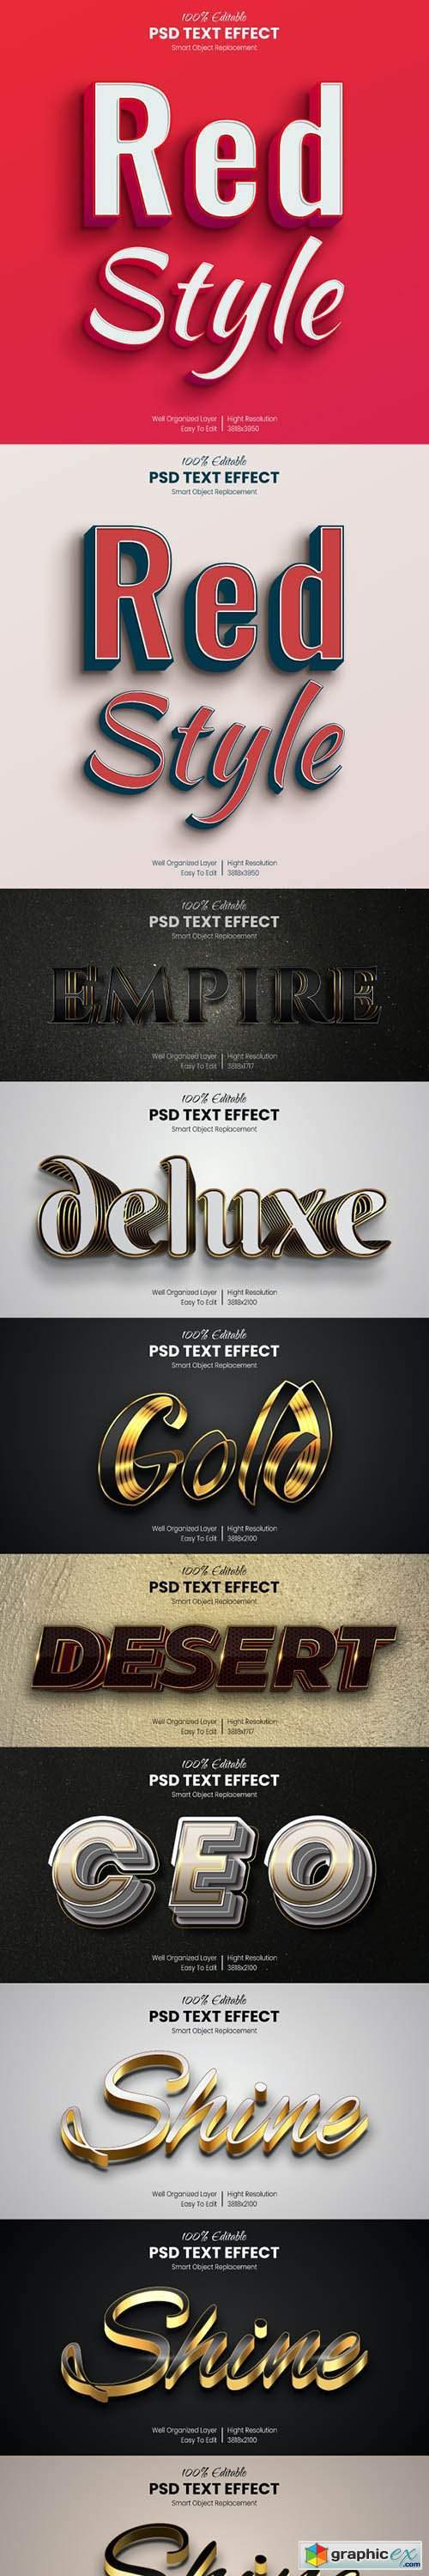 13 Photoshop Text Effects - Luxury Styles